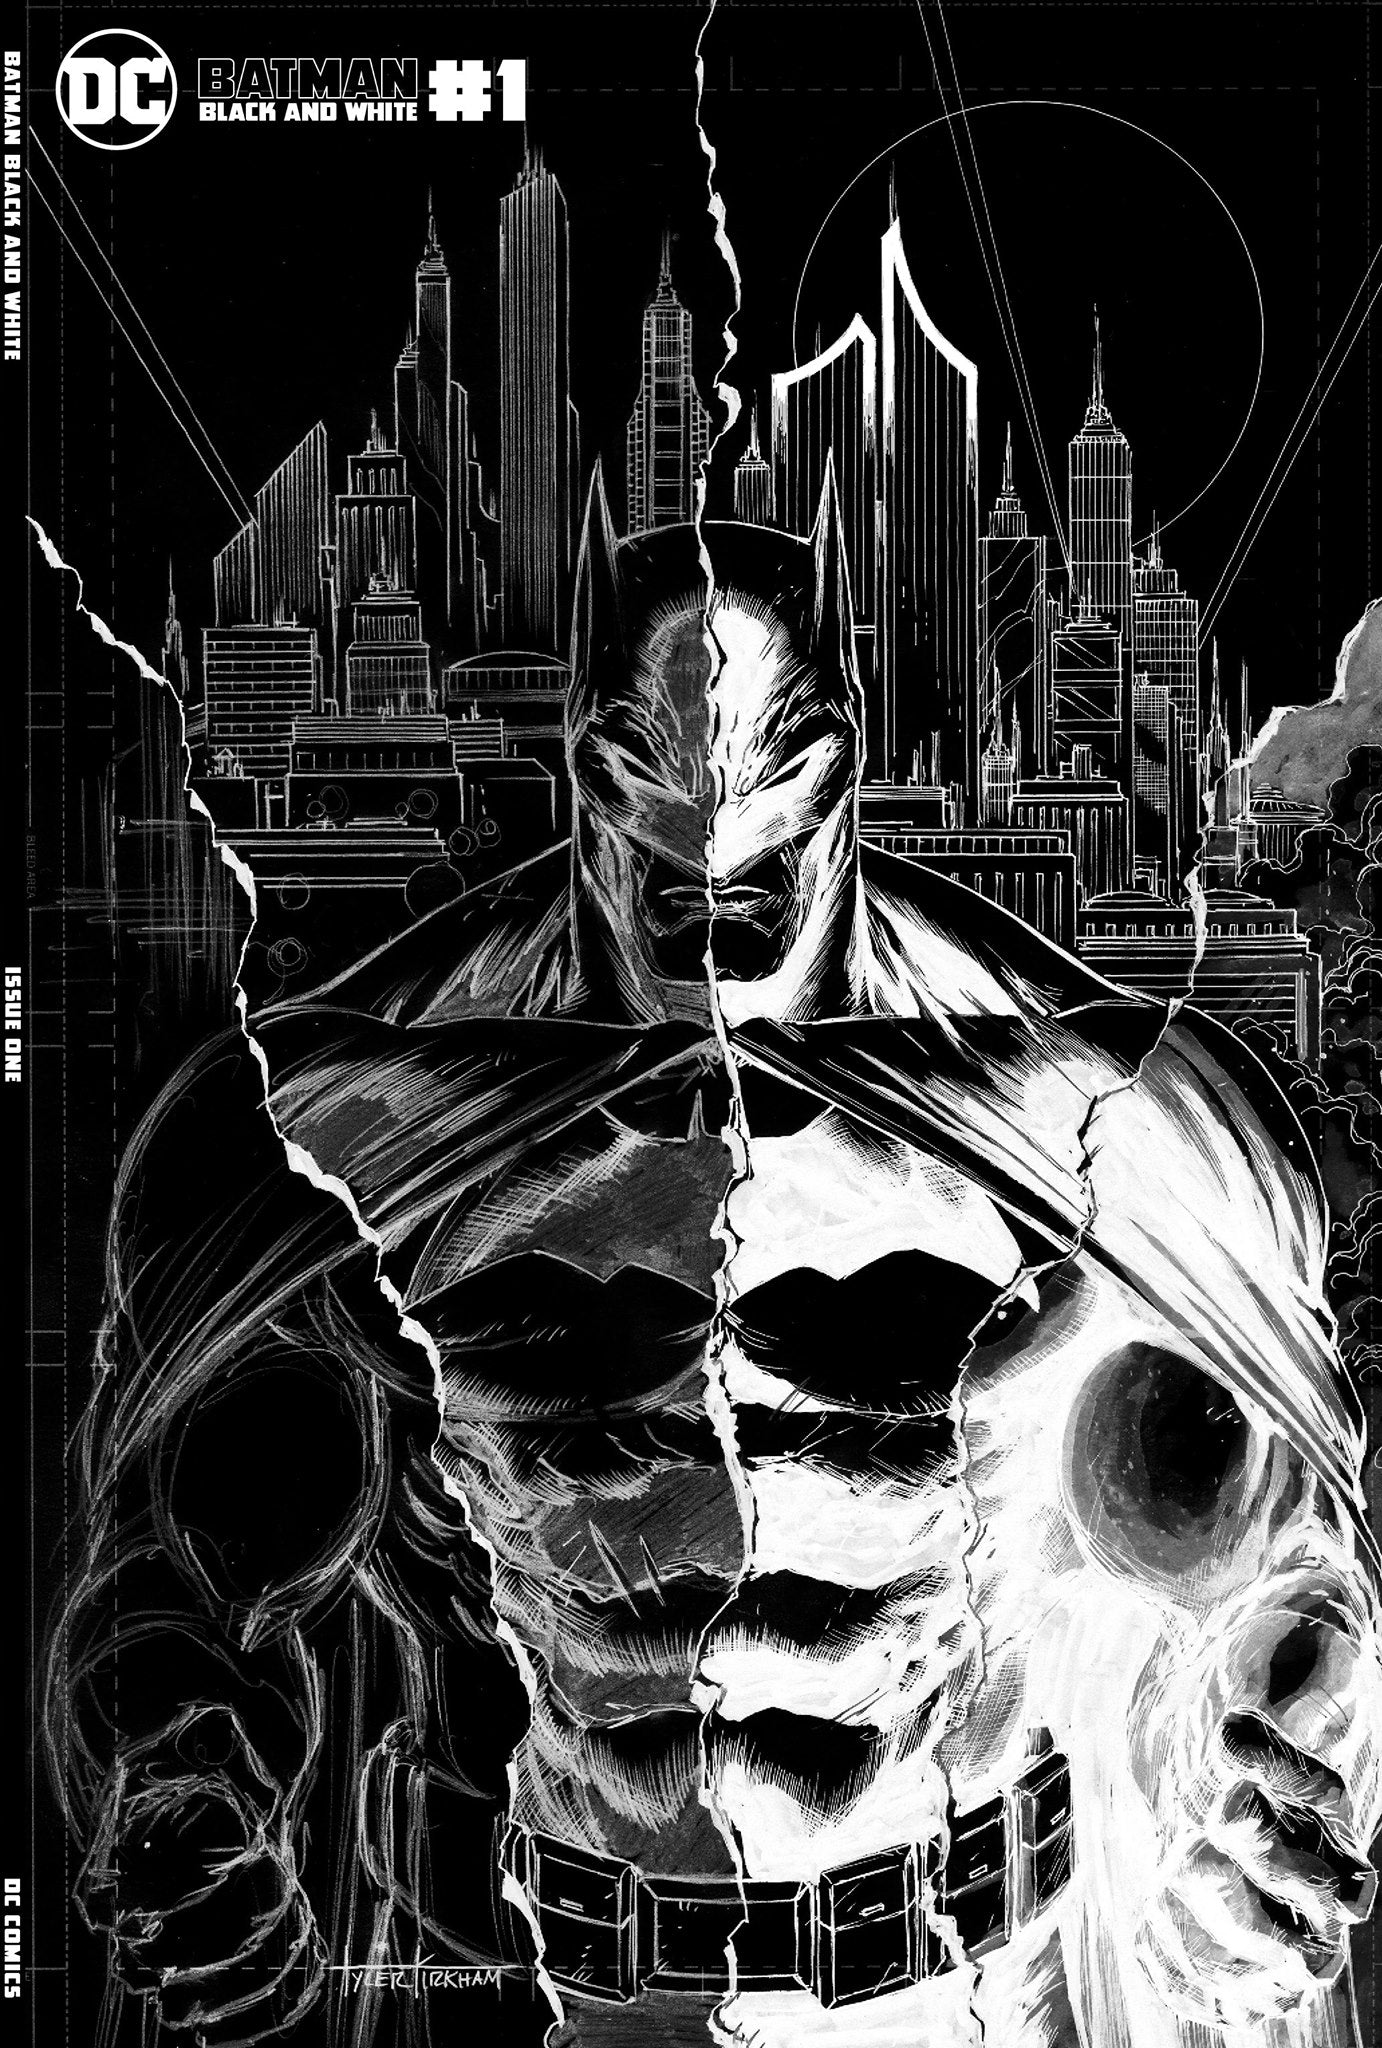 BATMAN BLACK AND WHITE #1 - LIMITED VARIANT COVER BY TYLER KIRKHAM –  Collectors Choice Comics